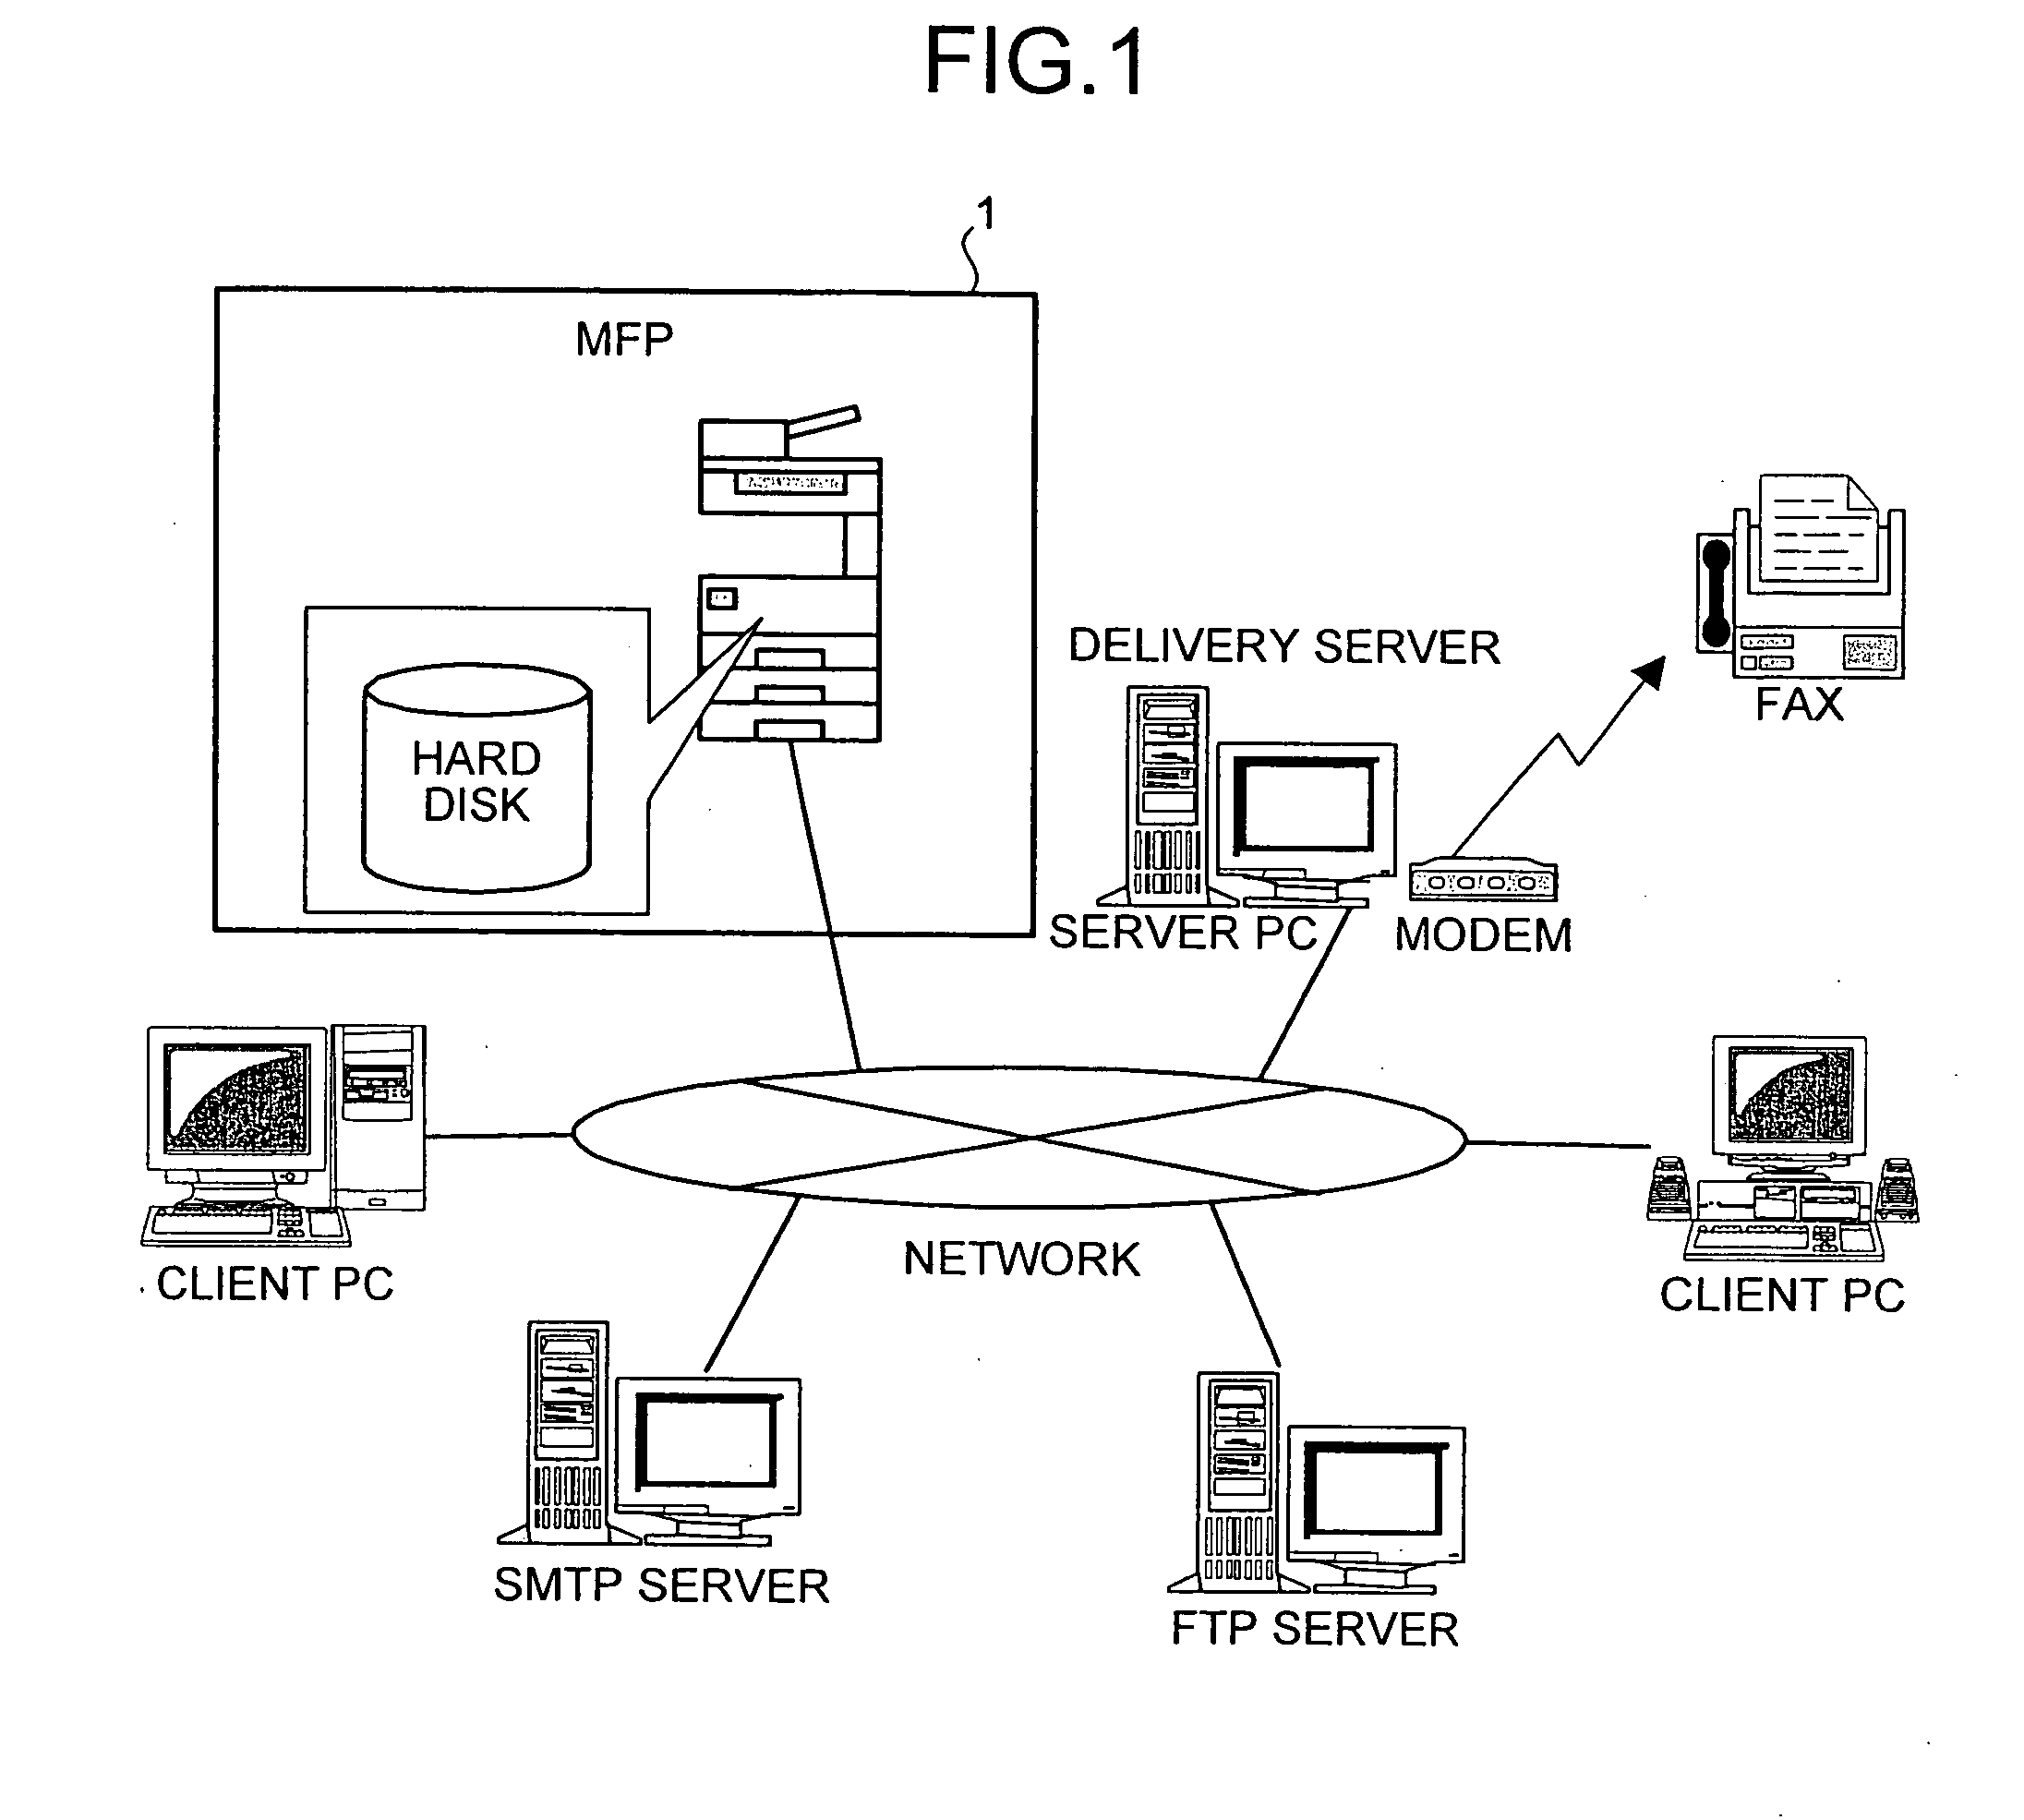 Apparatus and method for performing display processing, and computer program product